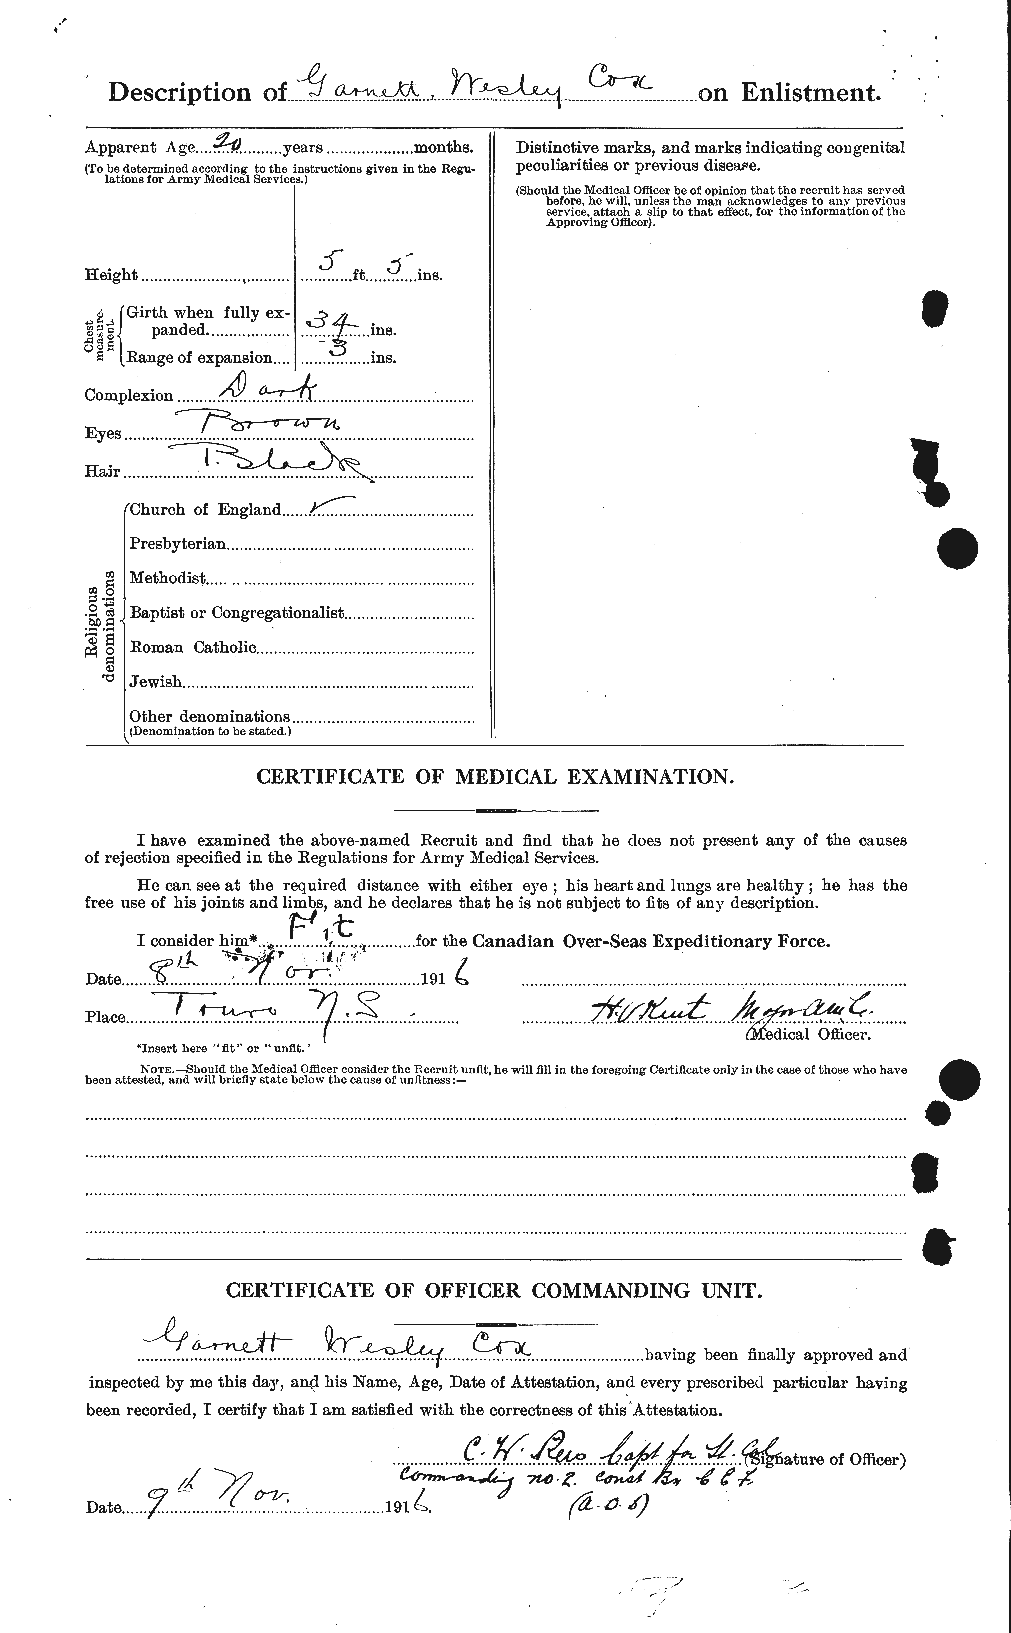 Personnel Records of the First World War - CEF 060210b